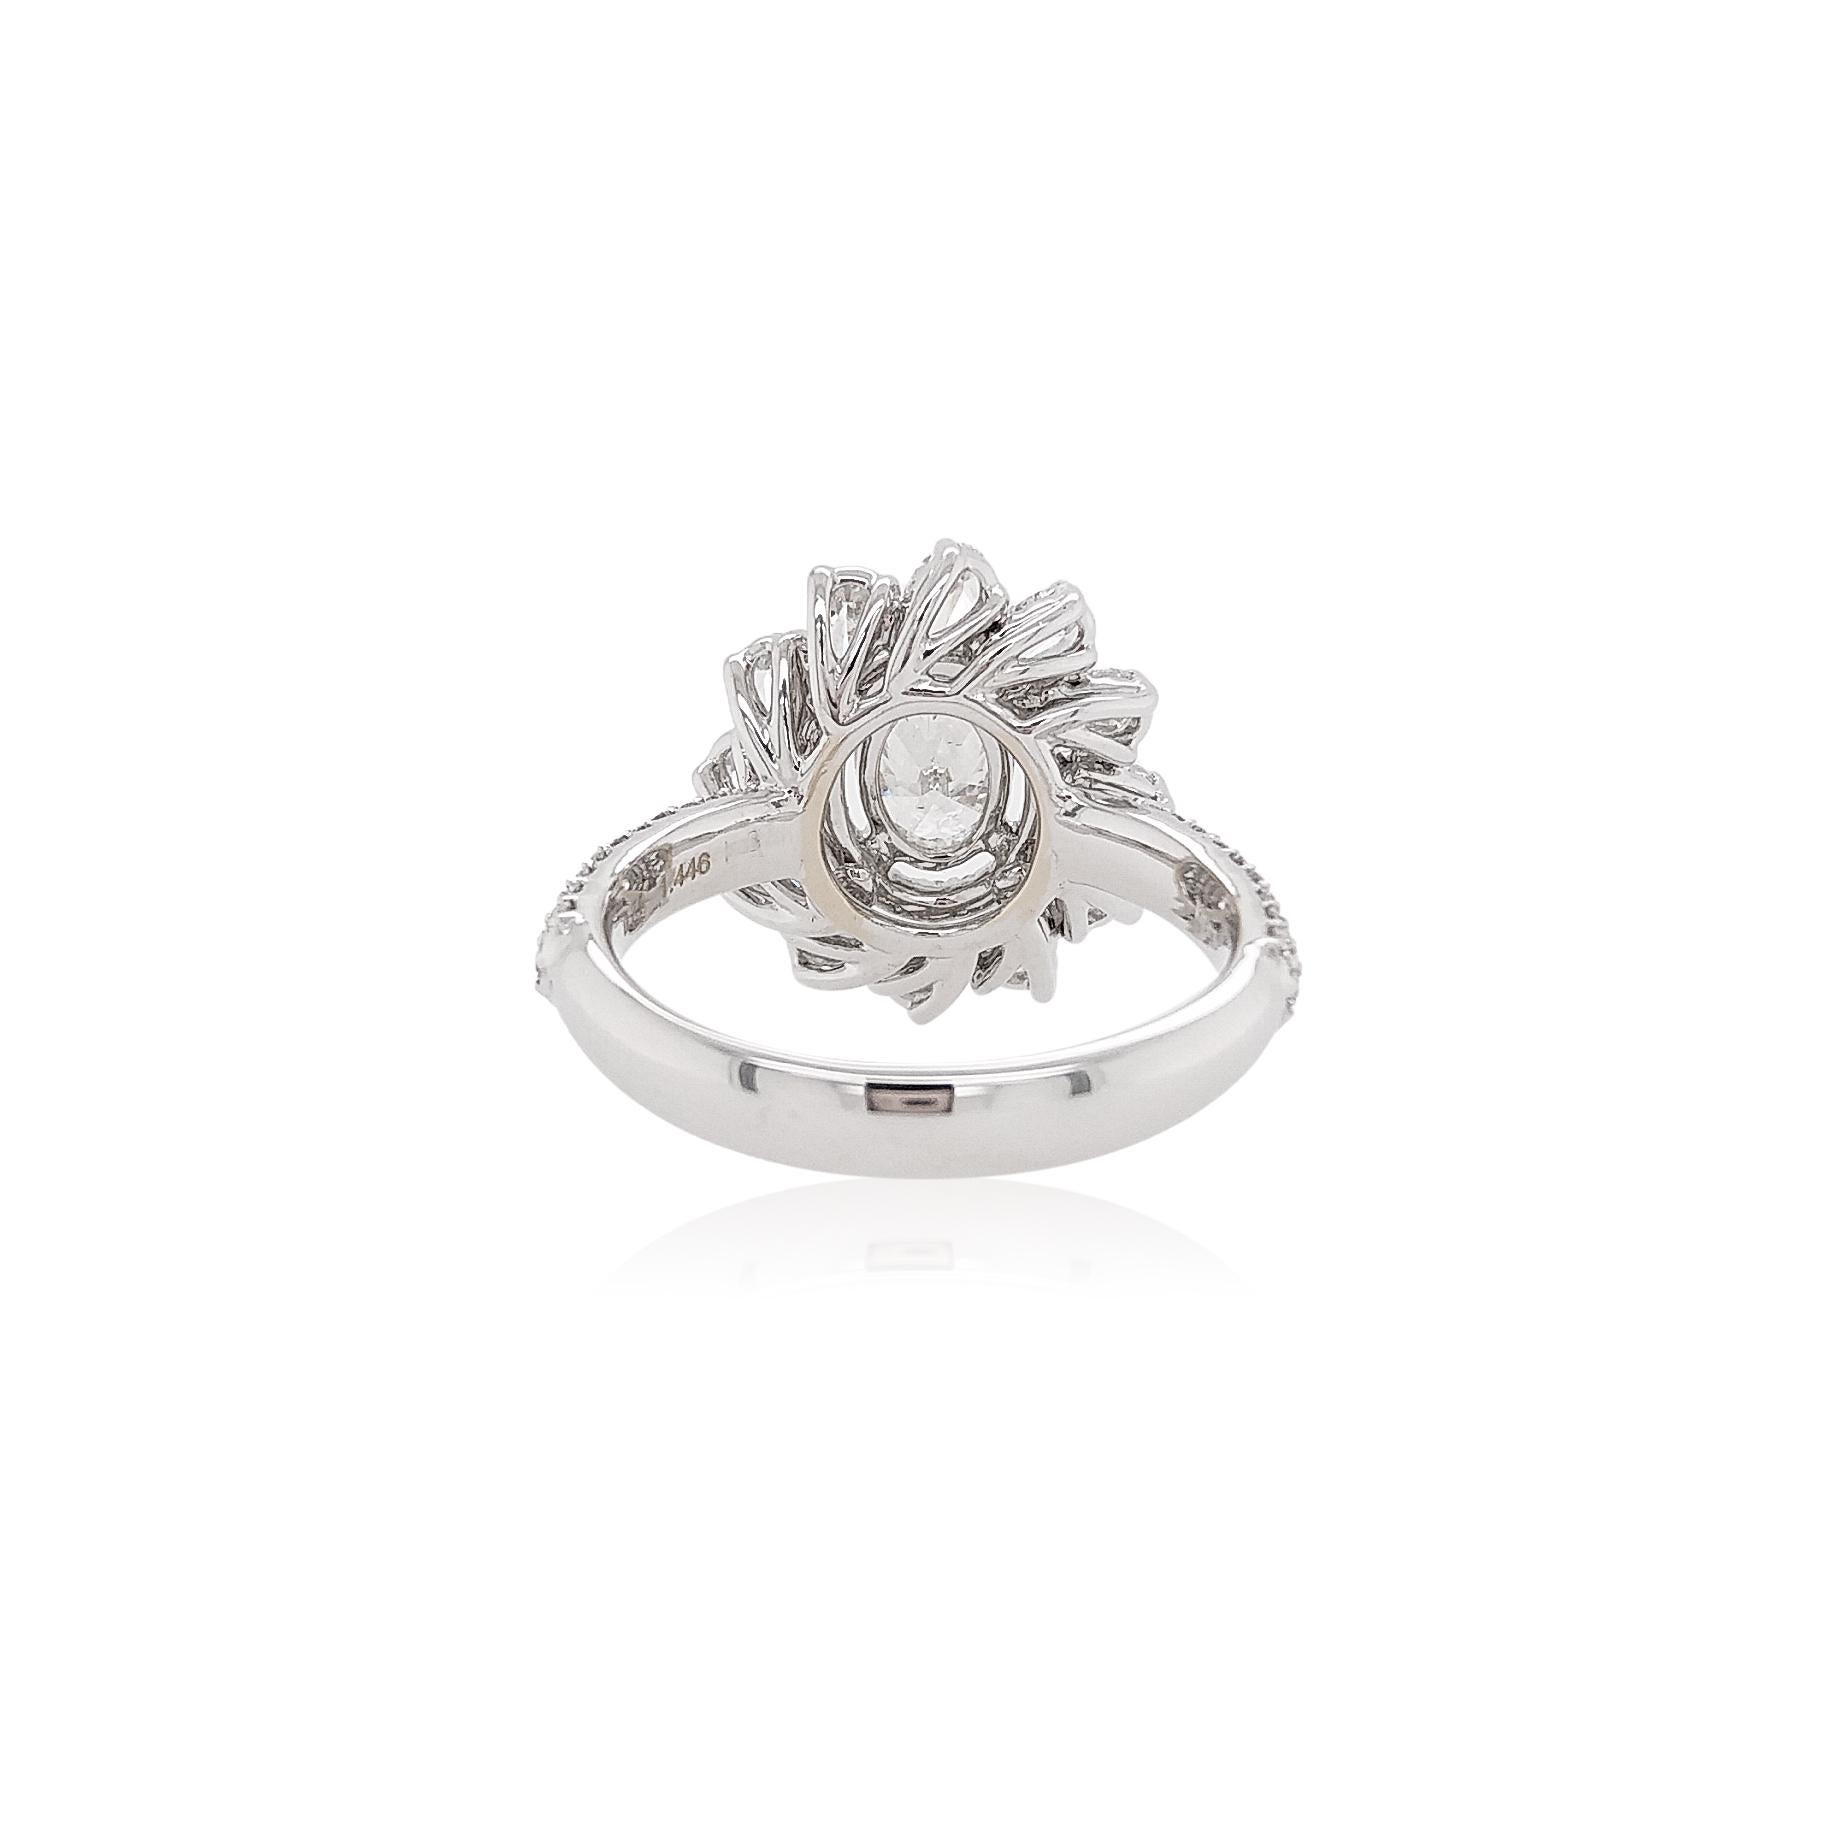 This striking 18K White Gold ring is both unique and elegant. At the forefront of this piece is a vibrant GIA-certified Oval shape White Diamond. The lustrous of the diamond is complimented perfectly by the sparkle of the diamonds which surround it.